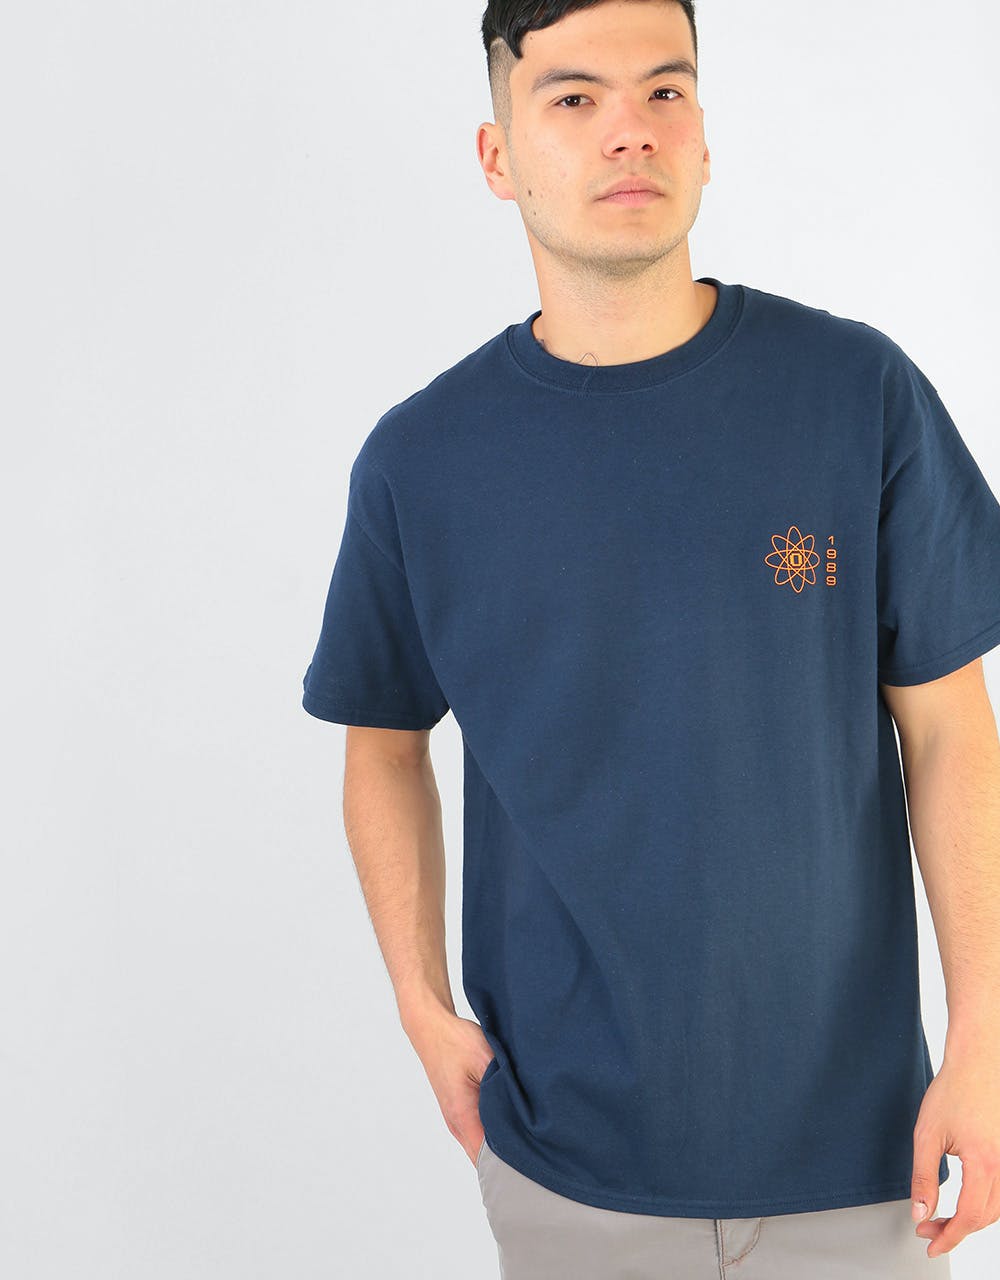 Route One Space Programme T-Shirt - Navy